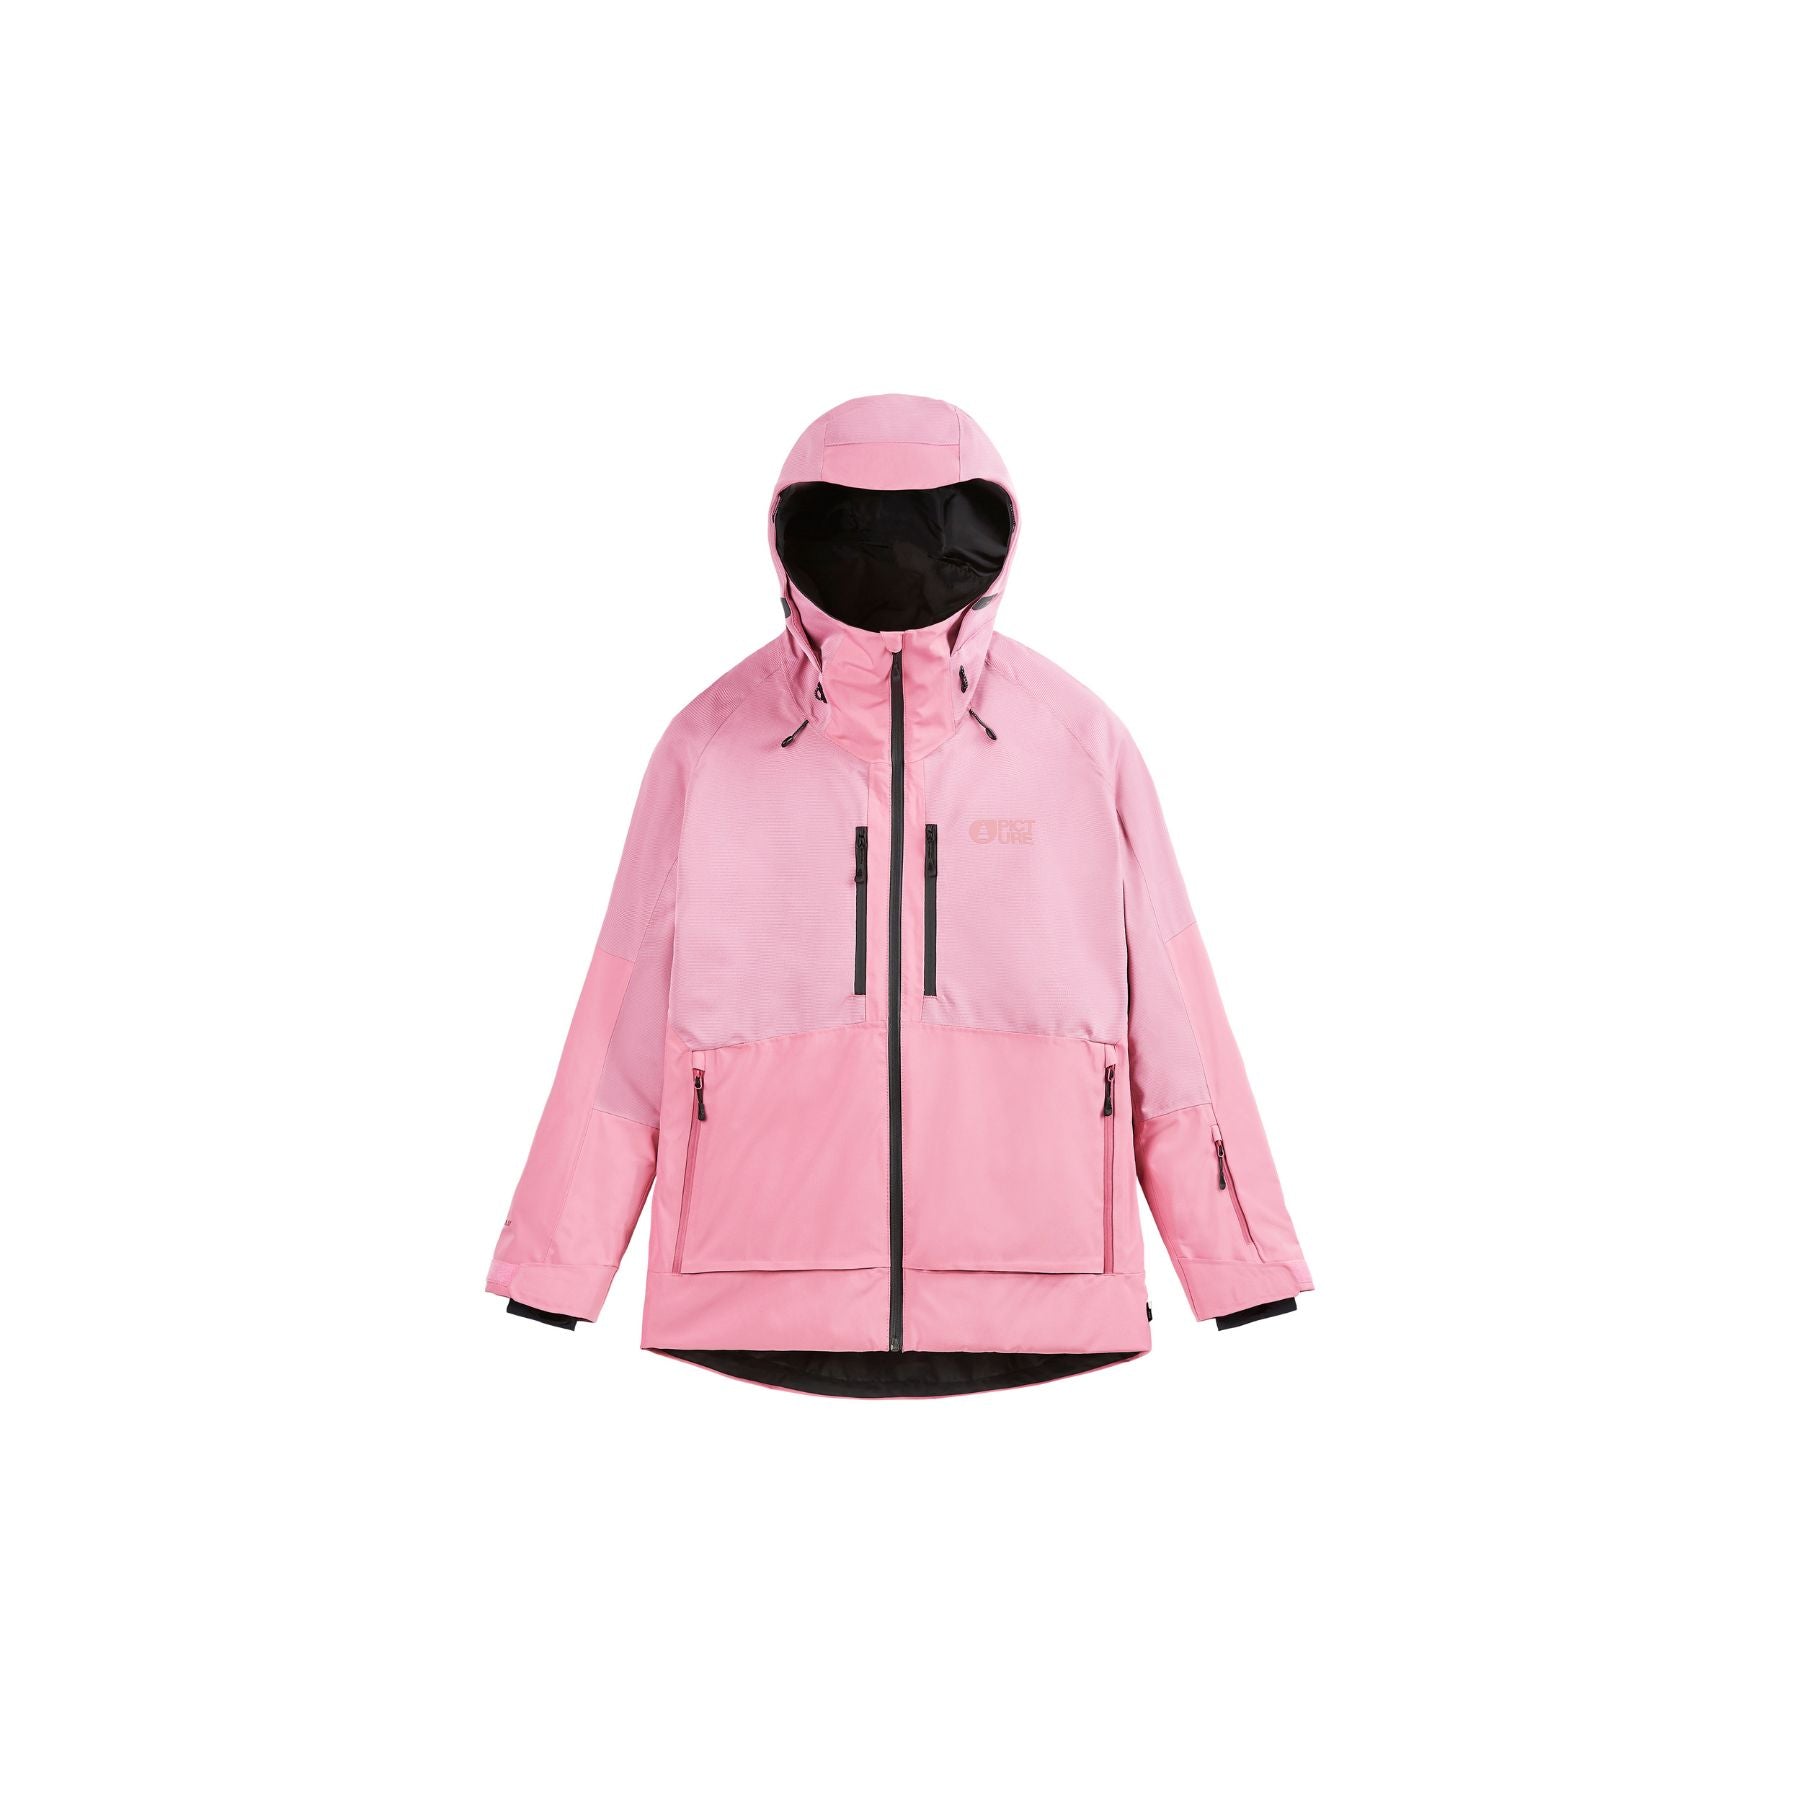 Picture Sygna Jacket in Cashmere Rose